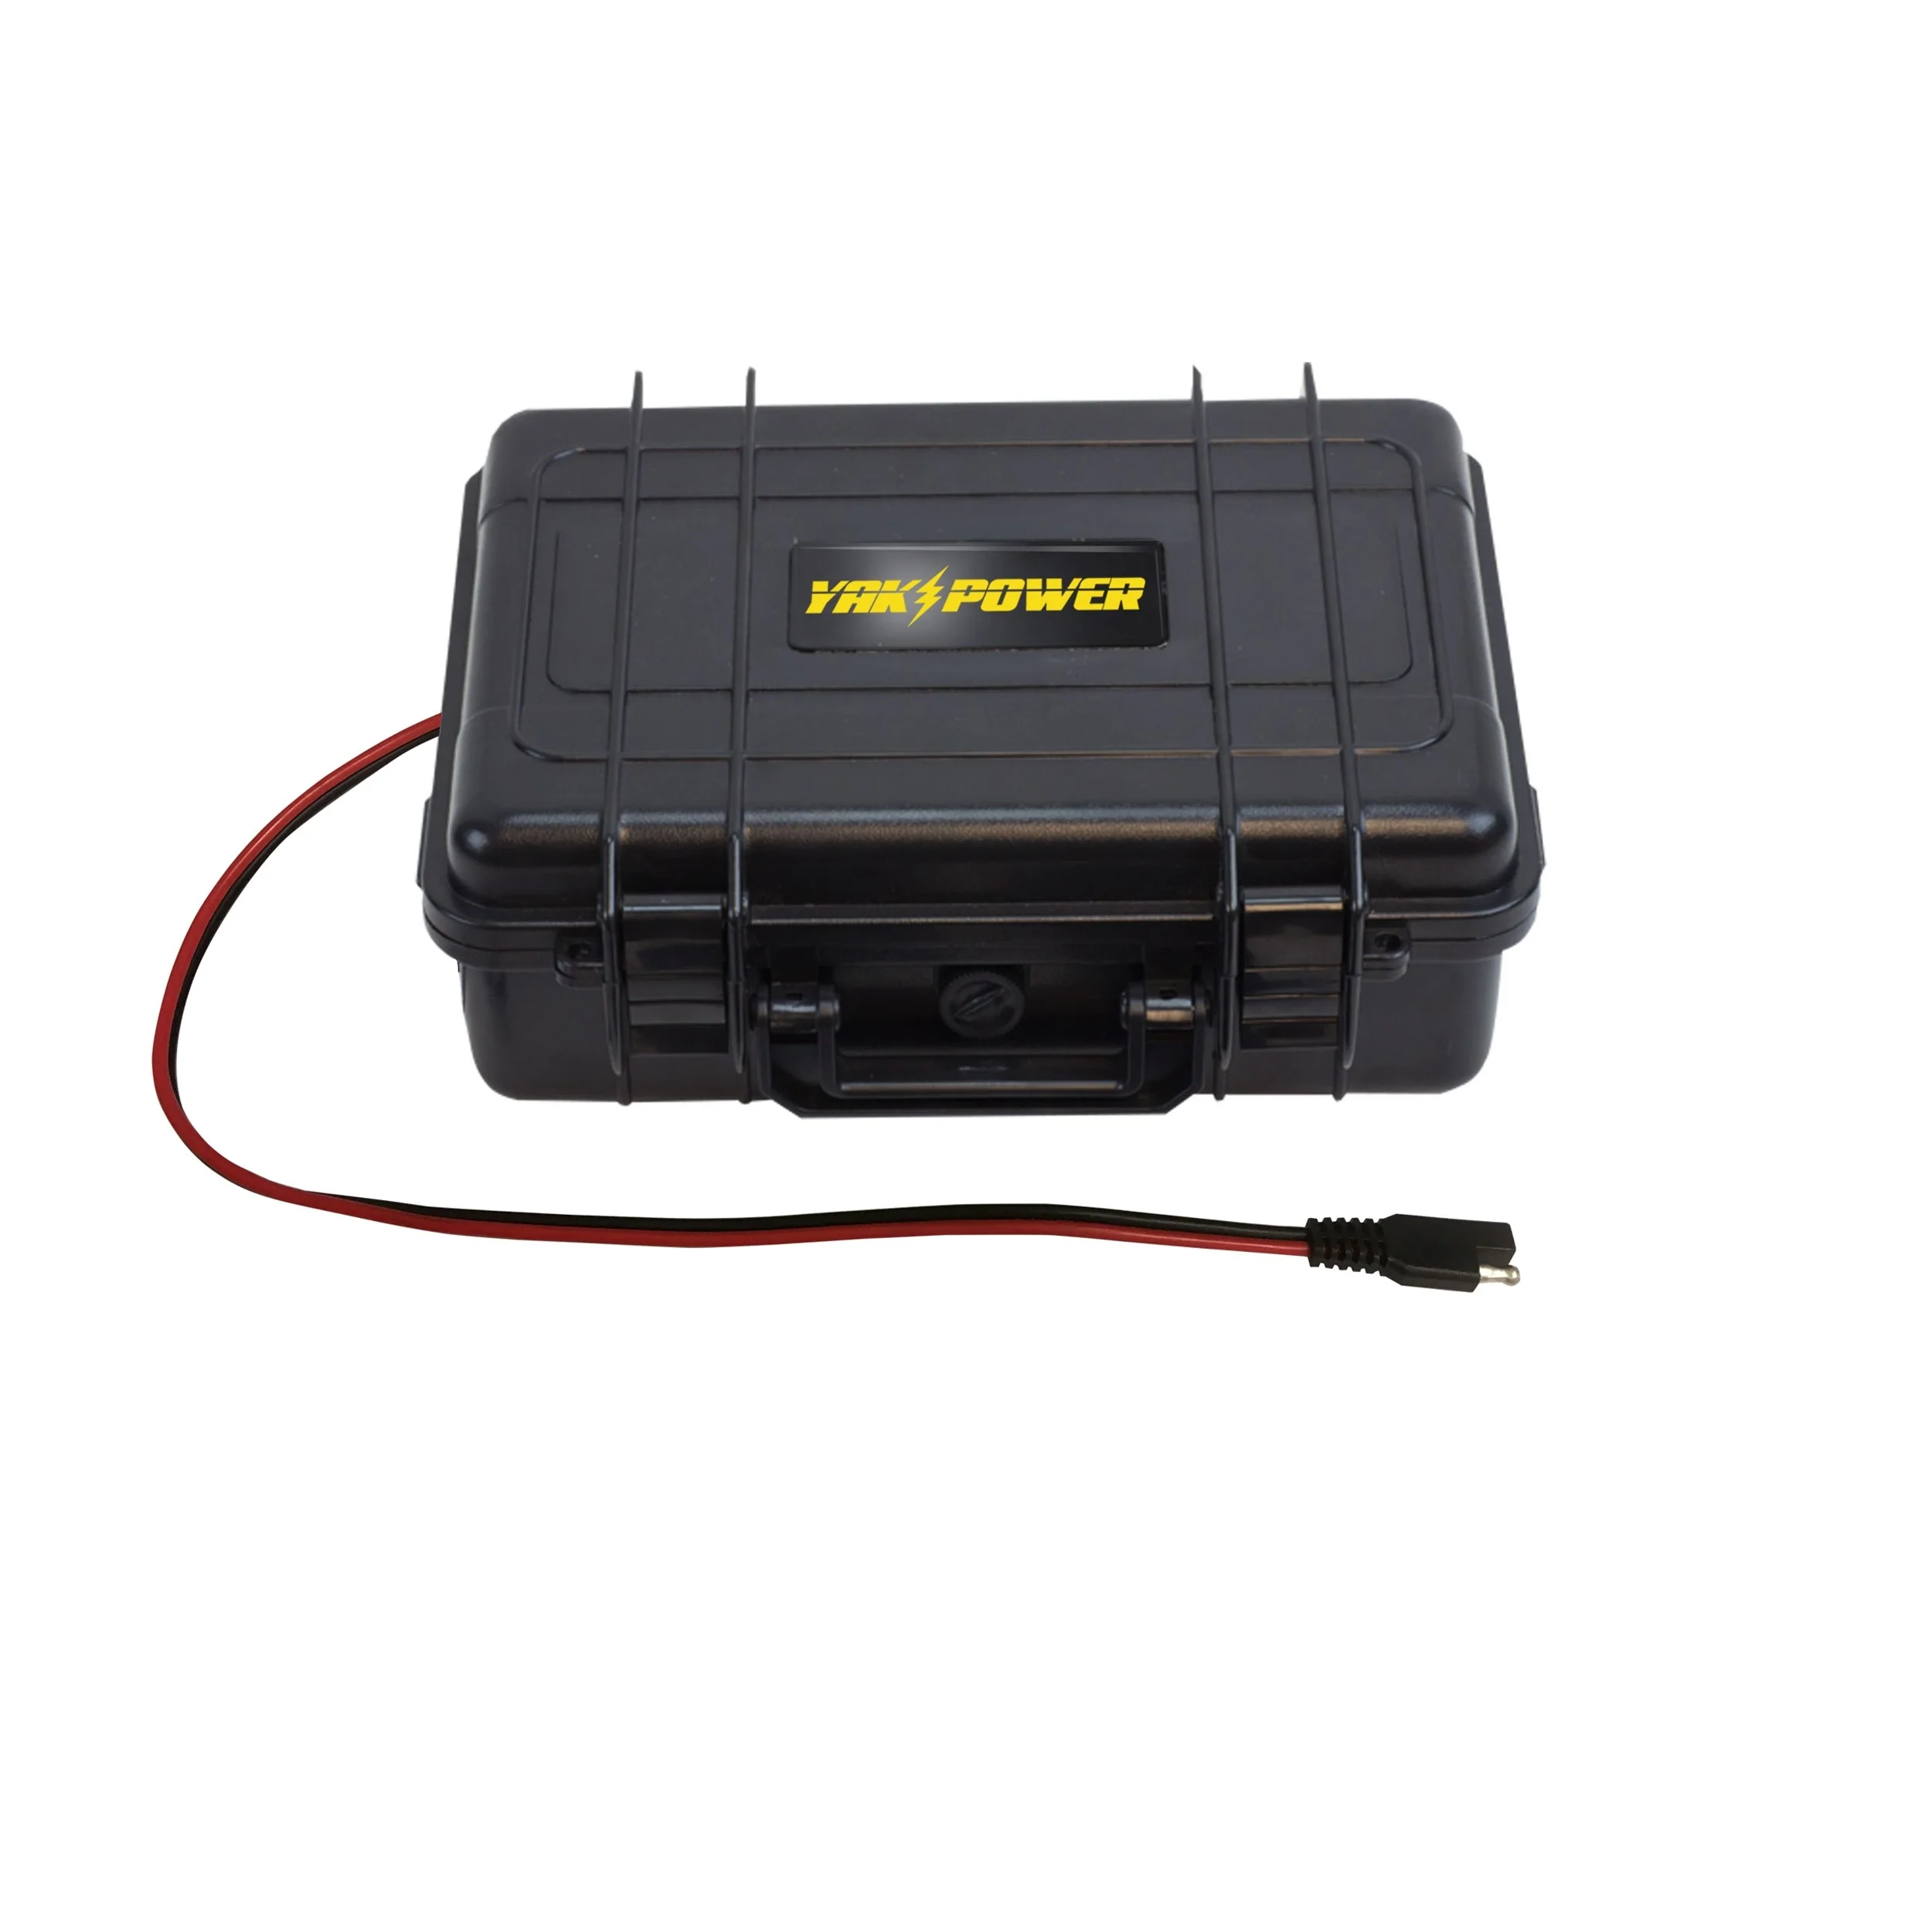 Power Box - Waterproof Dry Storage Box with Integrated USB Questions & Answers